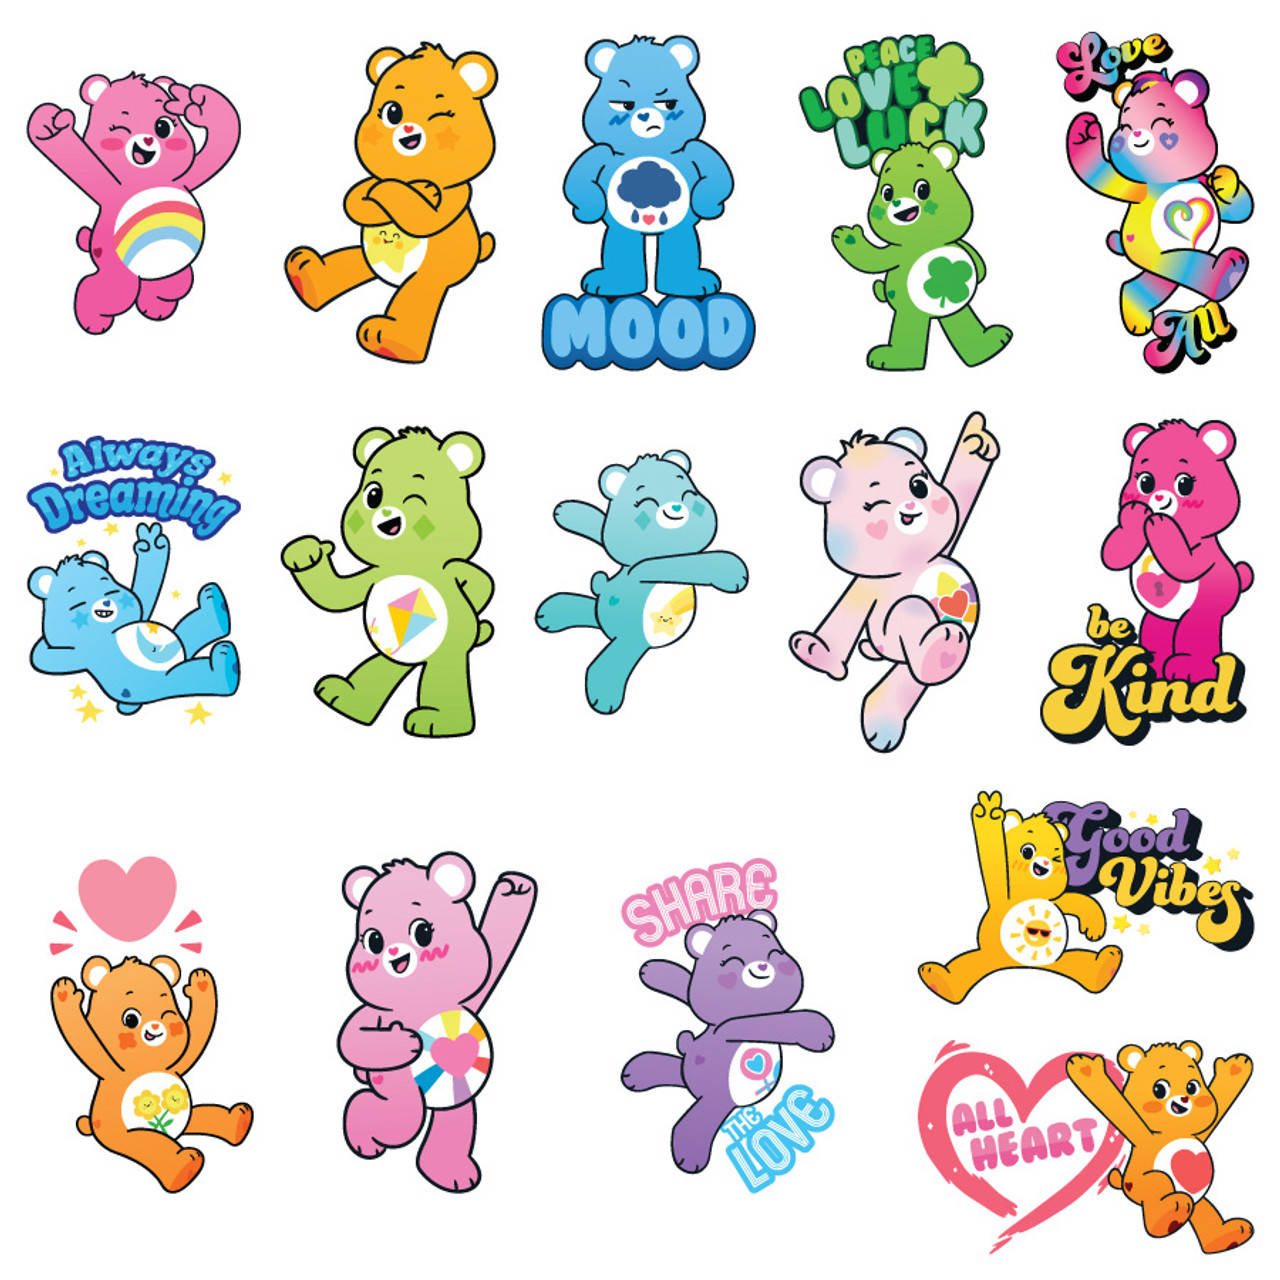  Care Bears Unlock The Magic 50CT Sticker Pack Large Deluxe  Stickers Variety Pack - Laptop, Water Bottle, Scrapbooking, Tablet,  Skateboard, Indoor/Outdoor - Set of 50